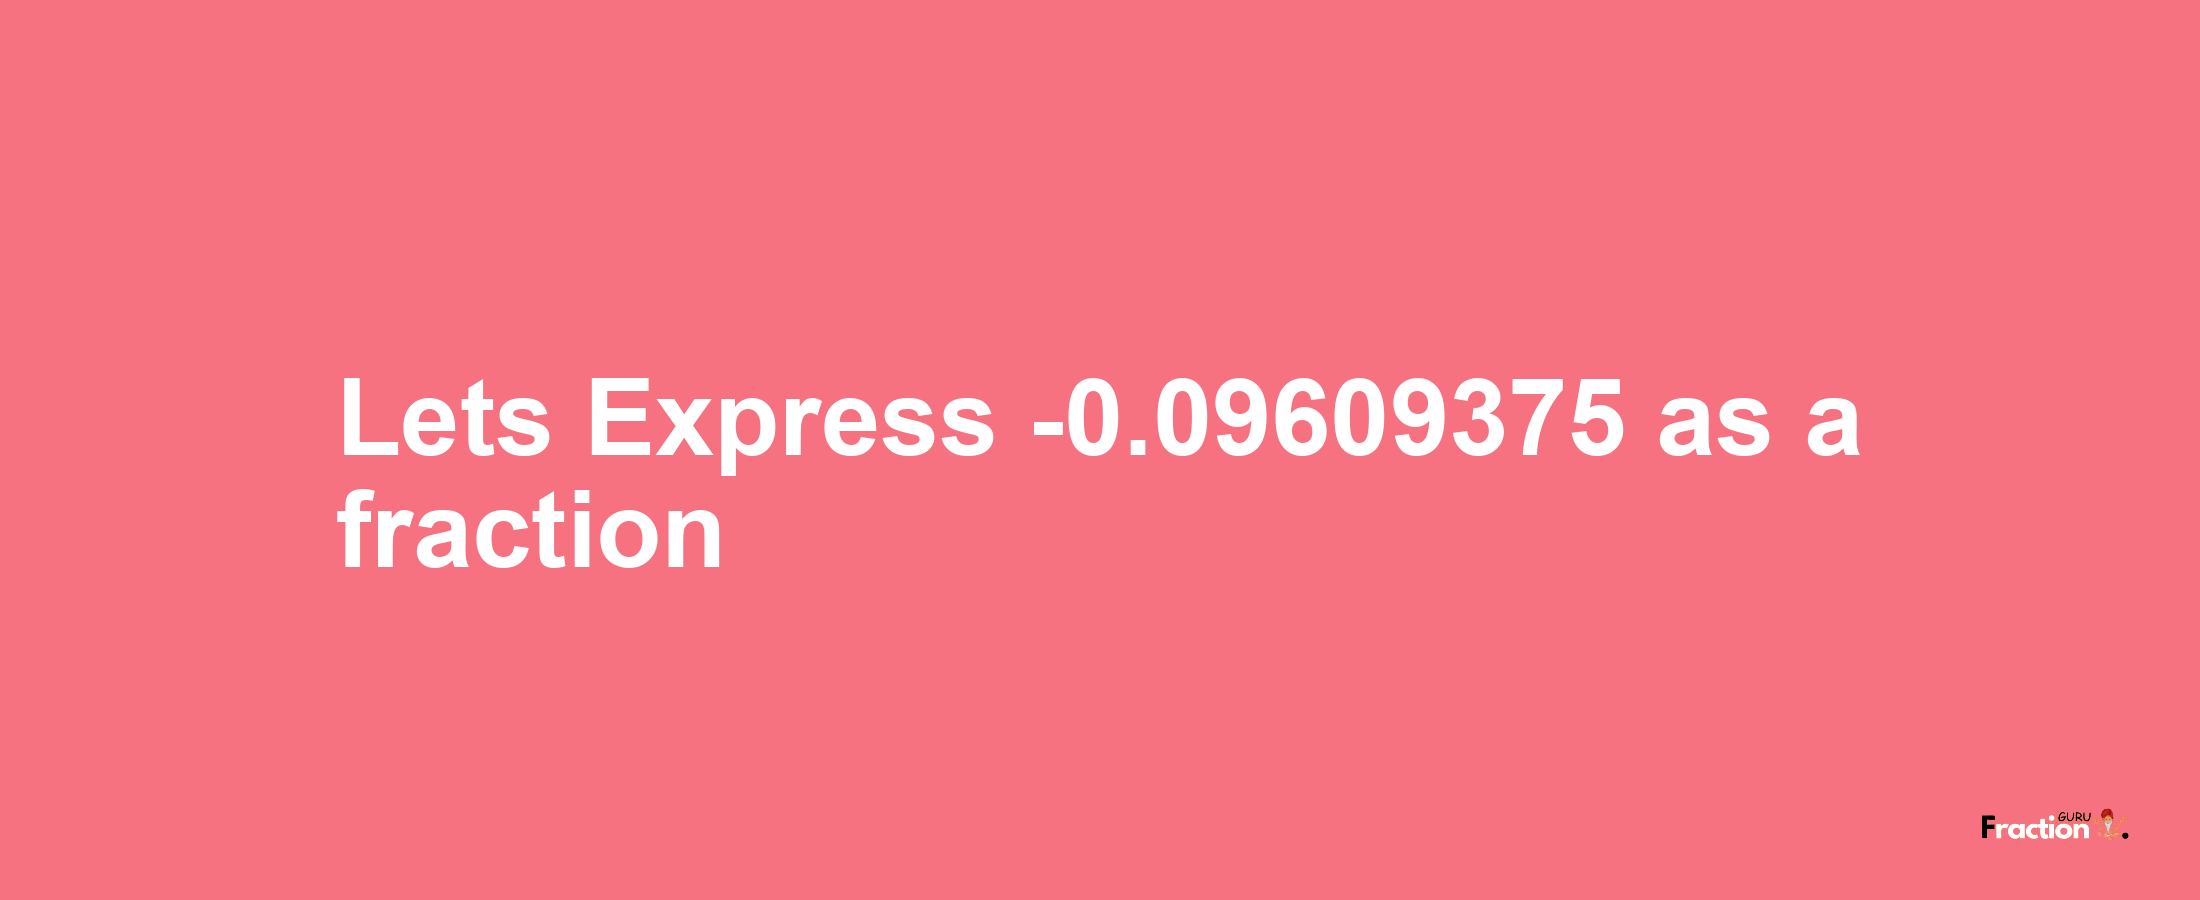 Lets Express -0.09609375 as afraction